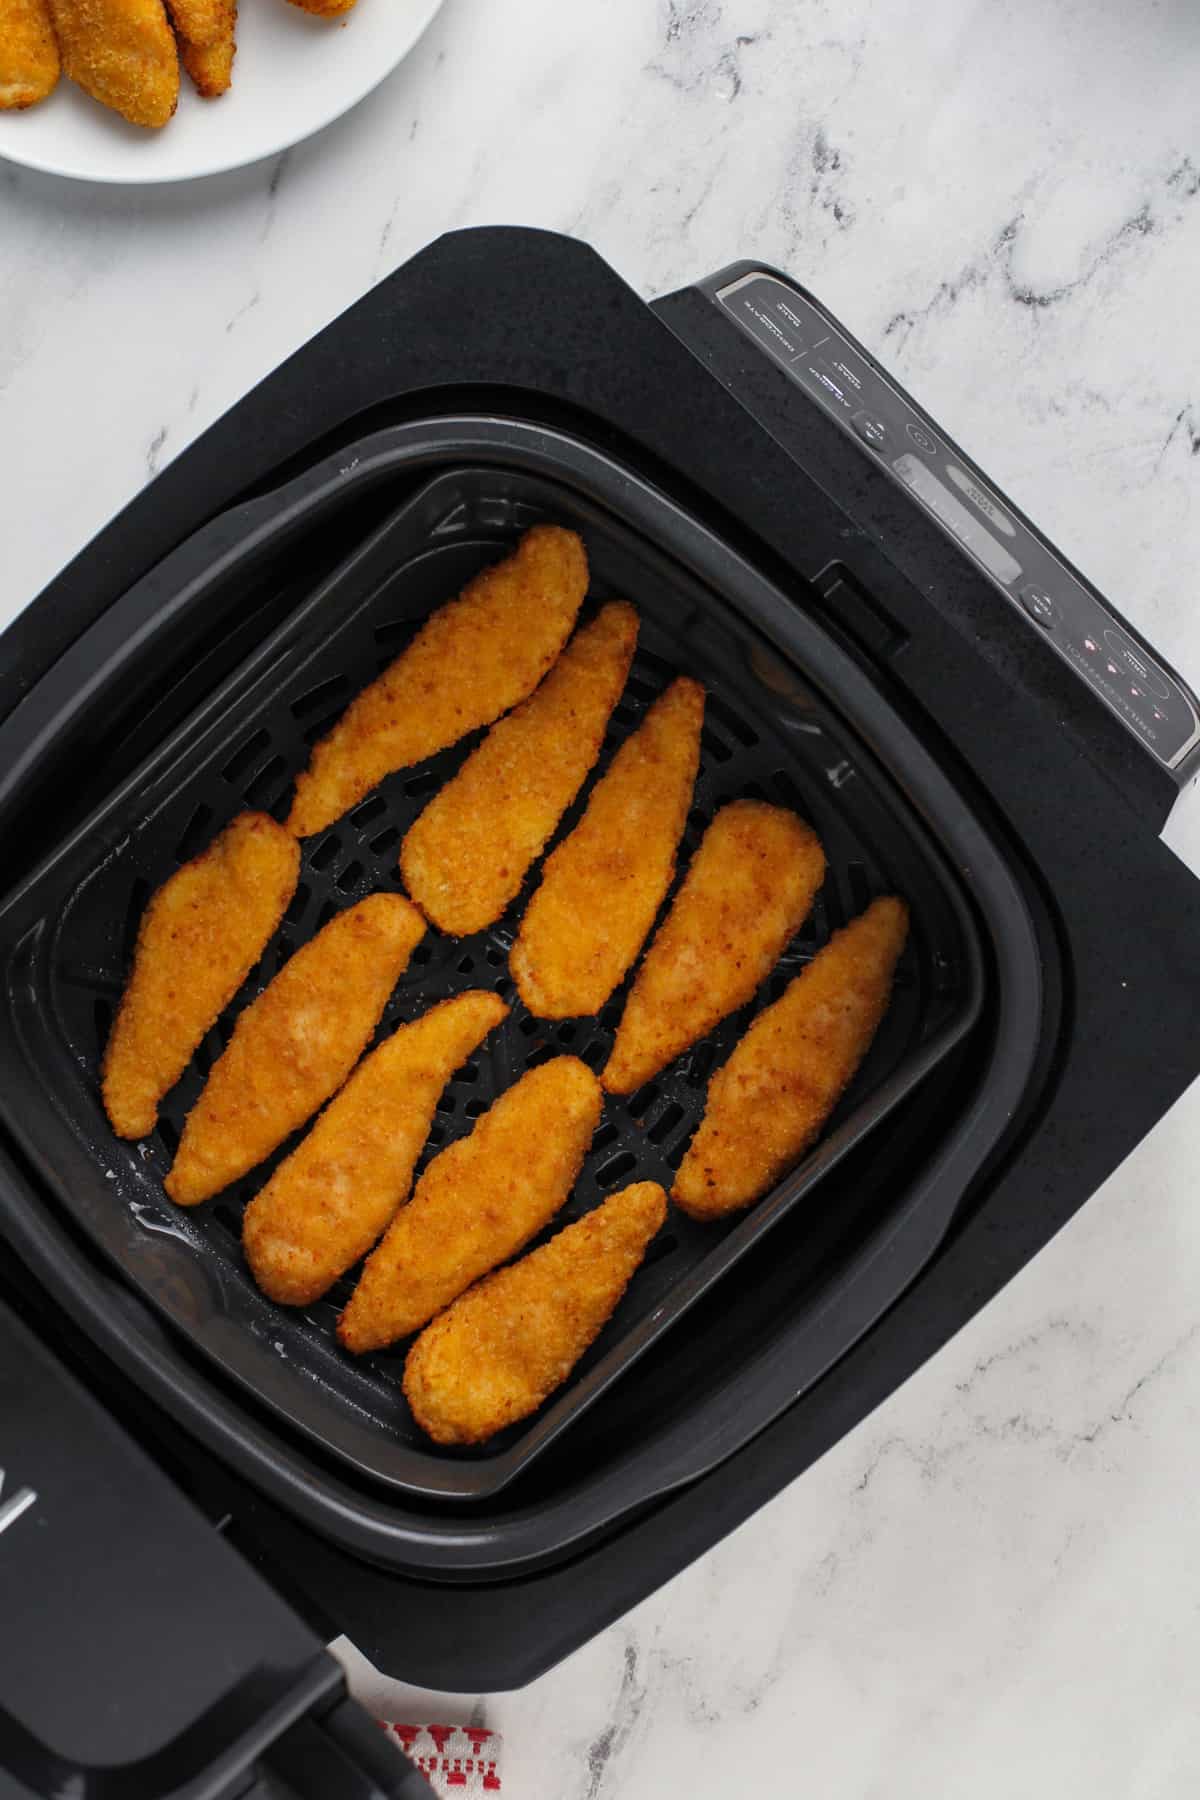 Cooked chicken tenders in the basket of an air fryer.